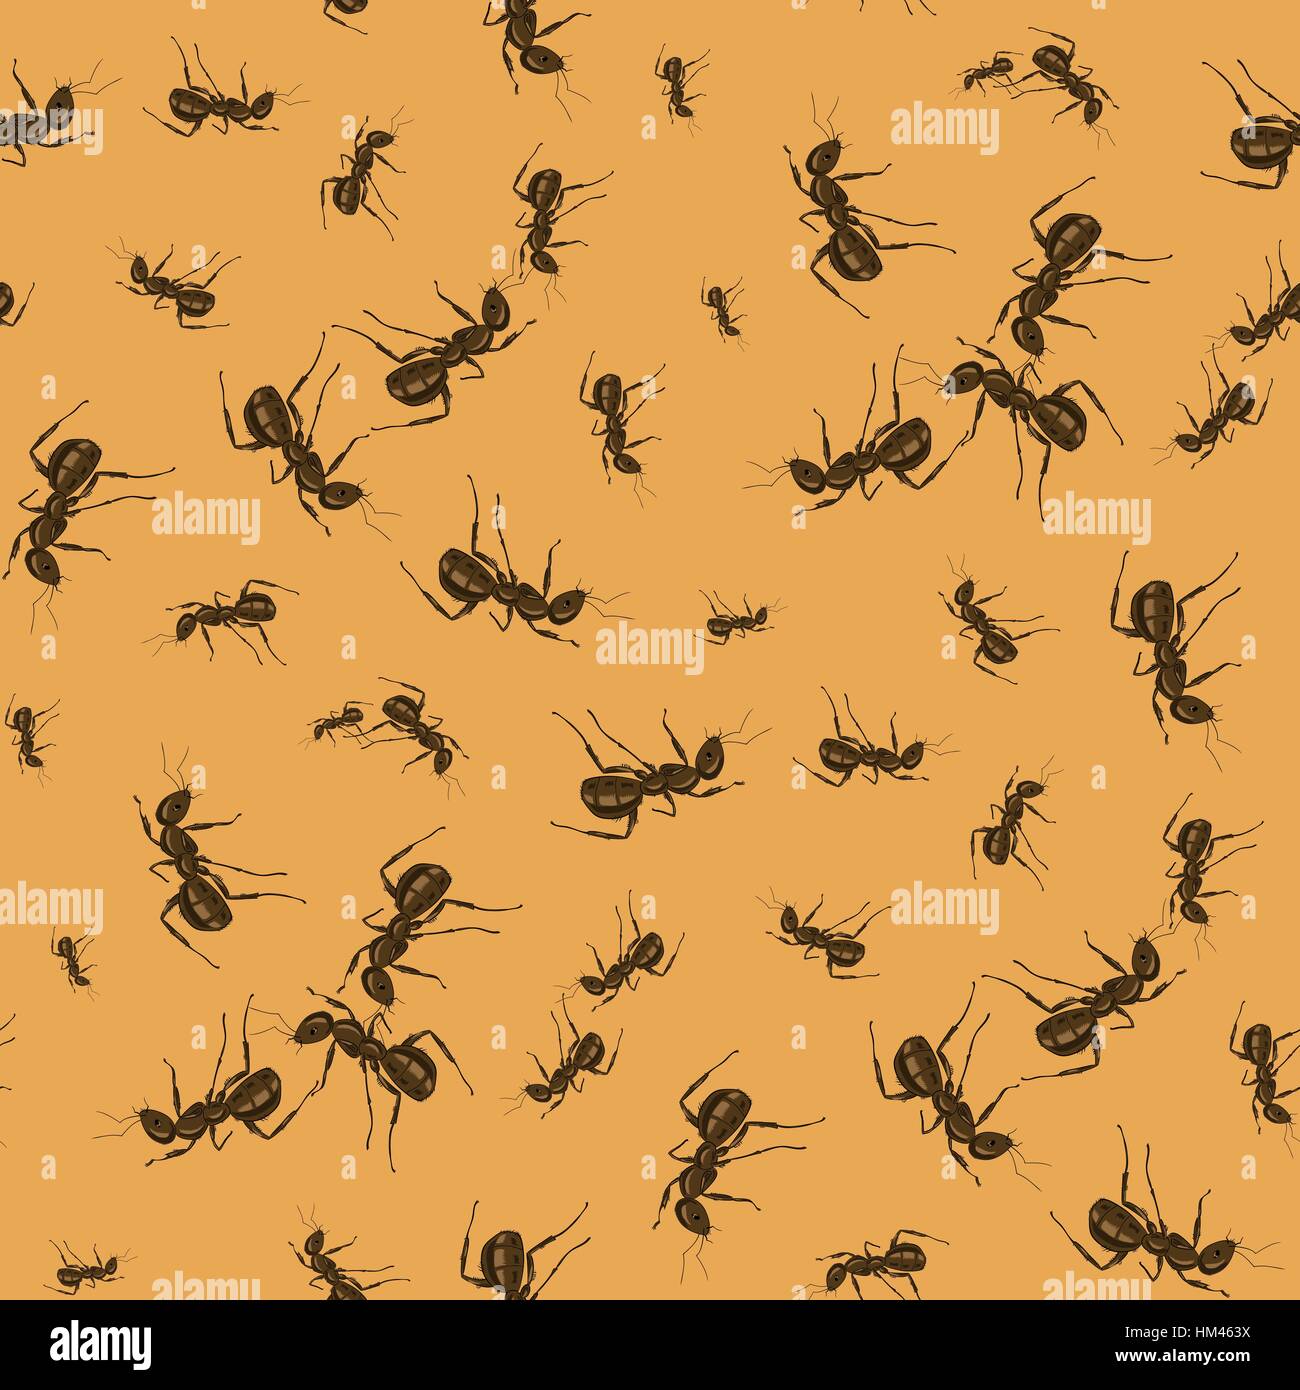 Ant Seamless Pattern Stock Vector